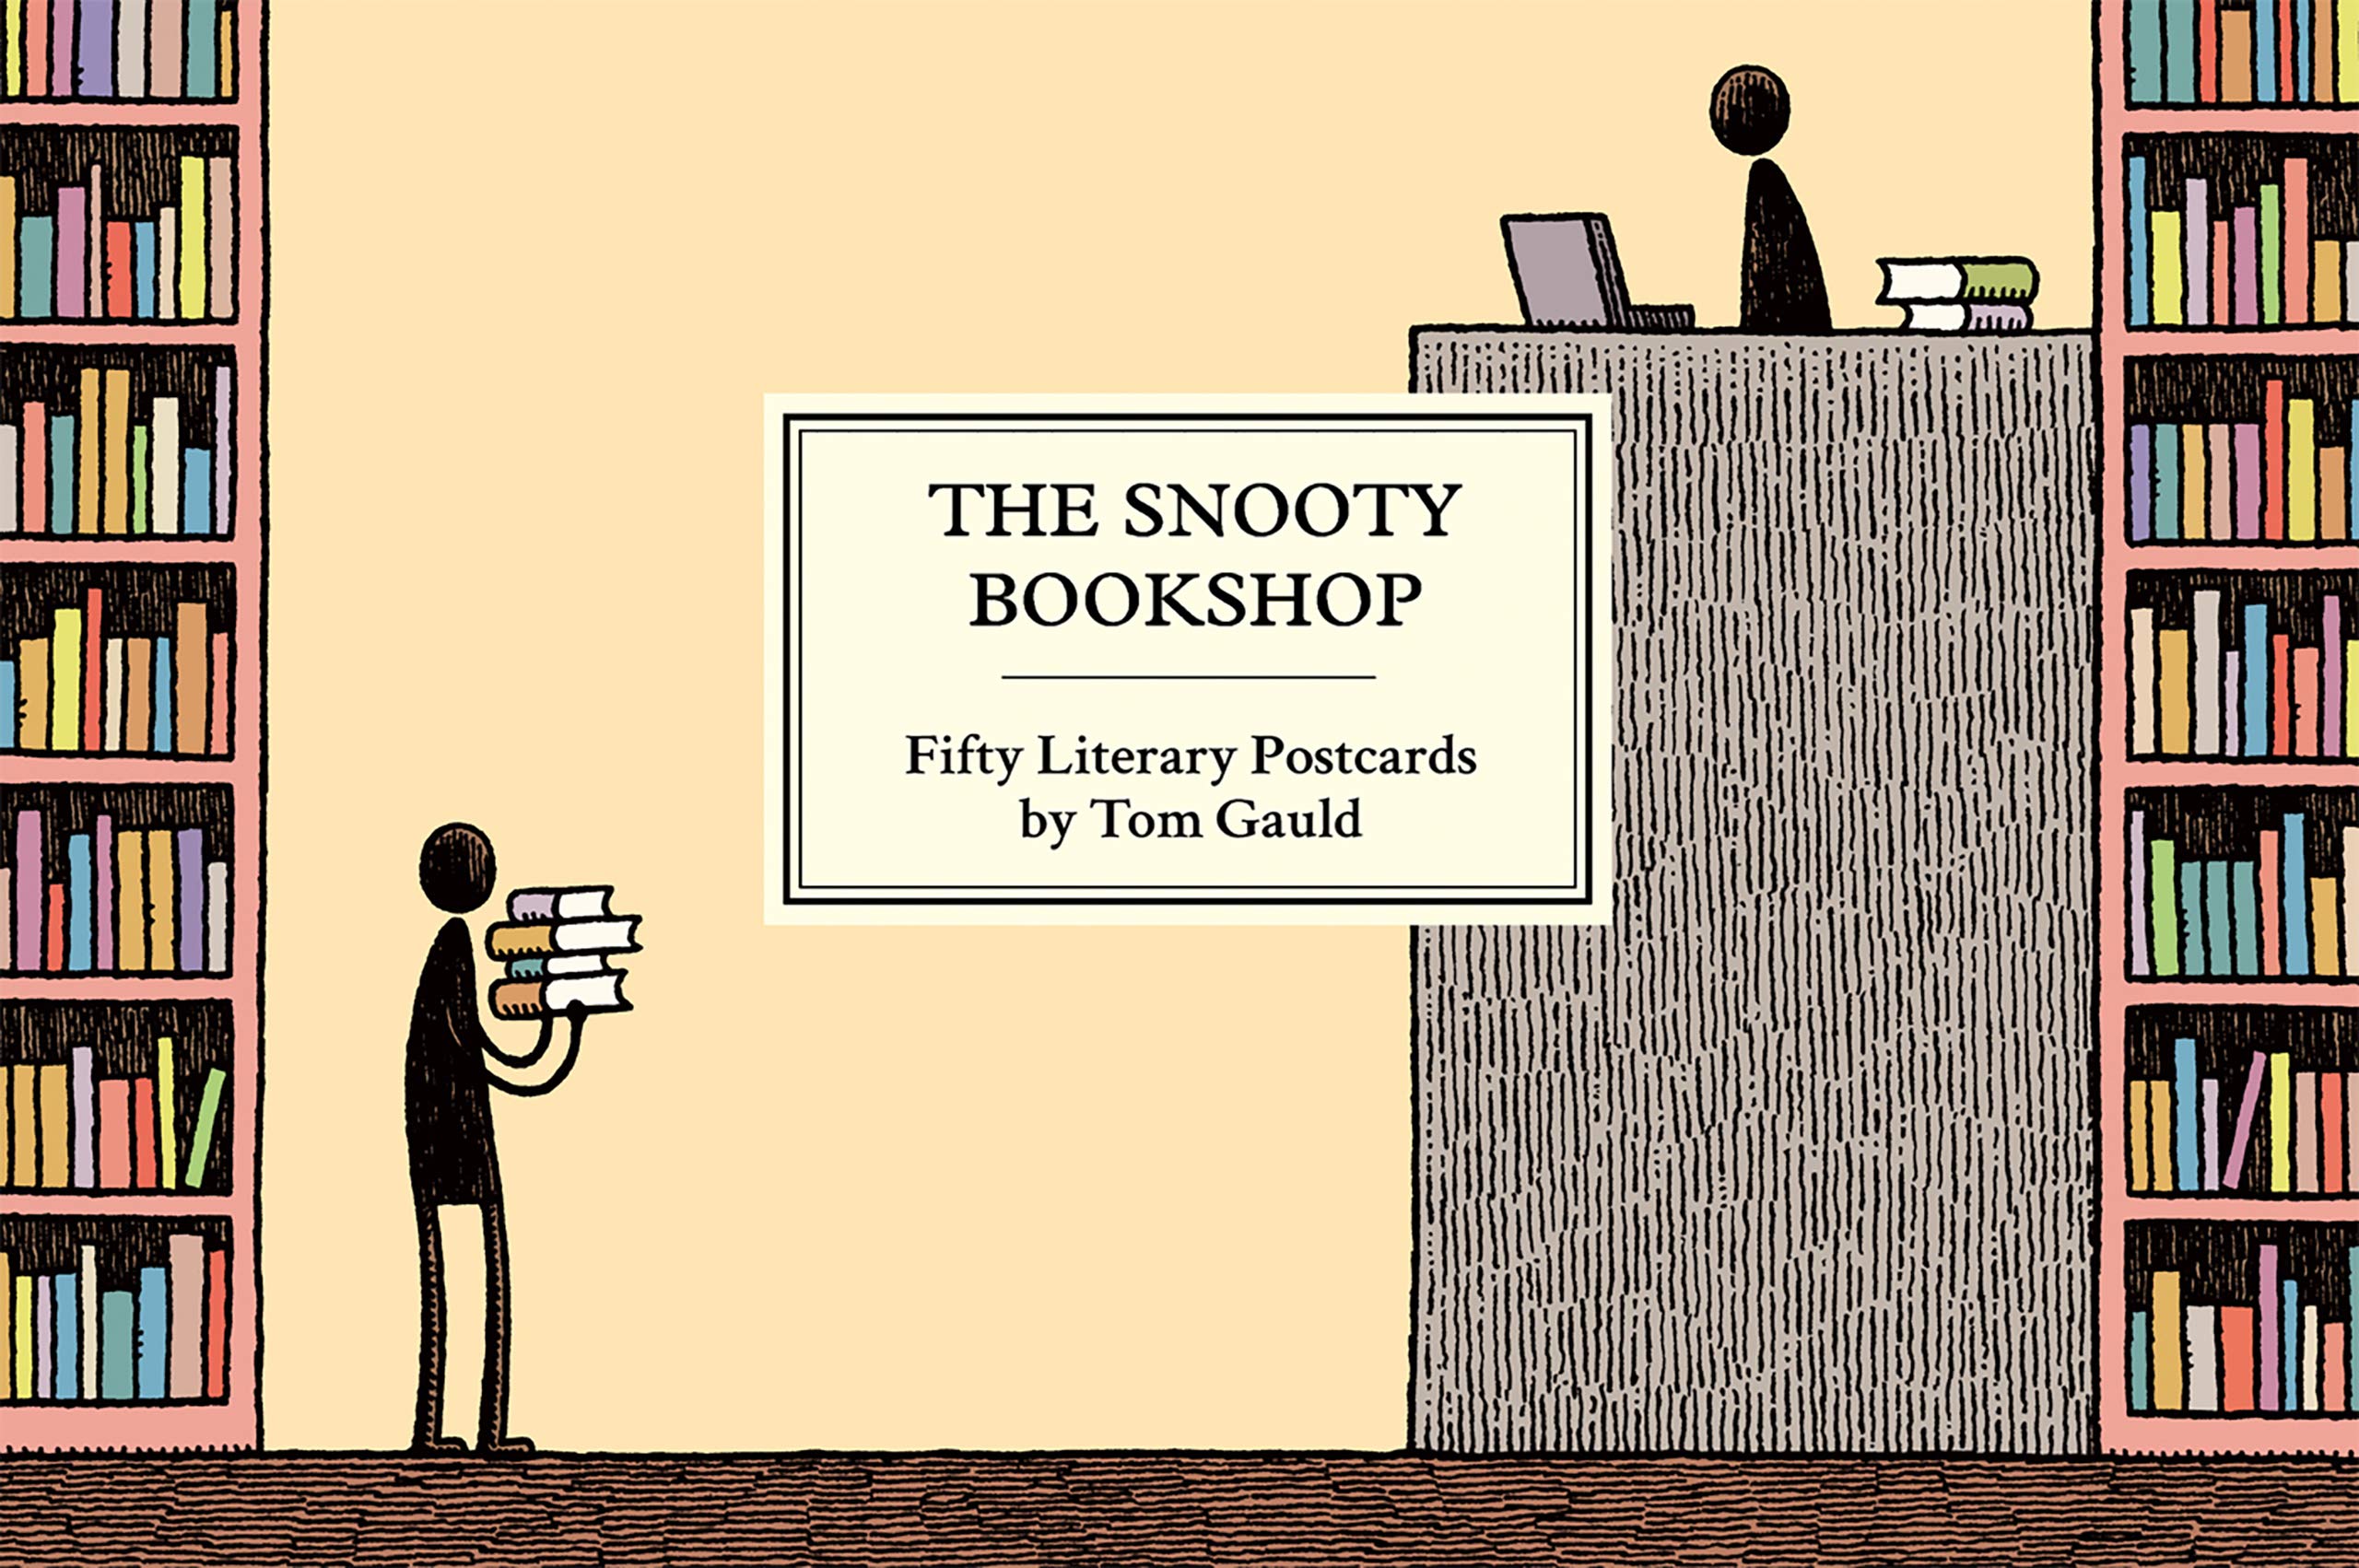 The Snooty Bookshop: Fifty Literary Postcards